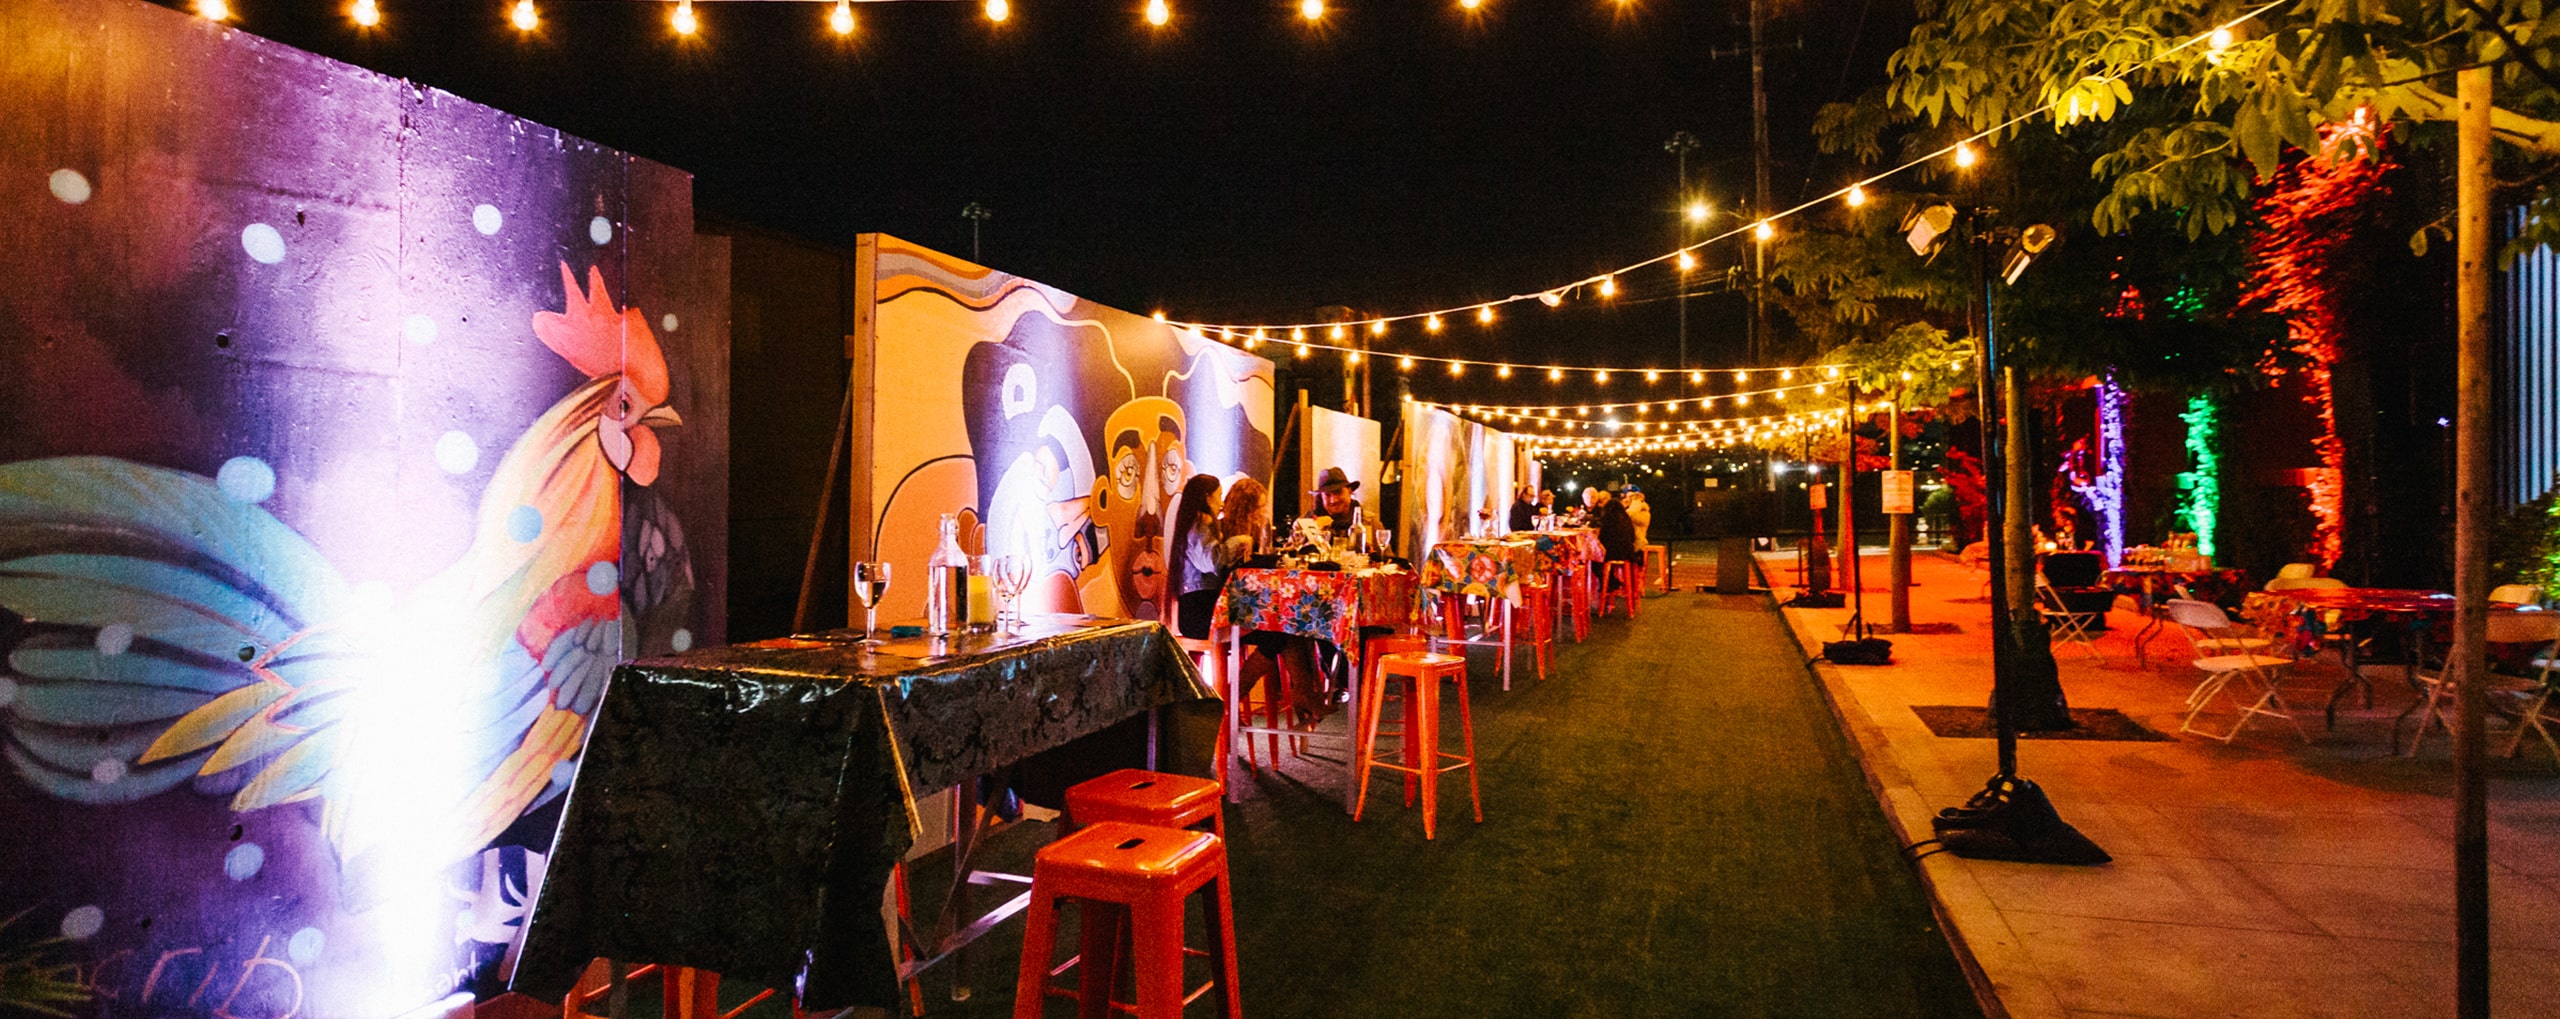 San Francisco Event Venue, Midway, Exterior, Patio, Event, Party, Crowd, Night